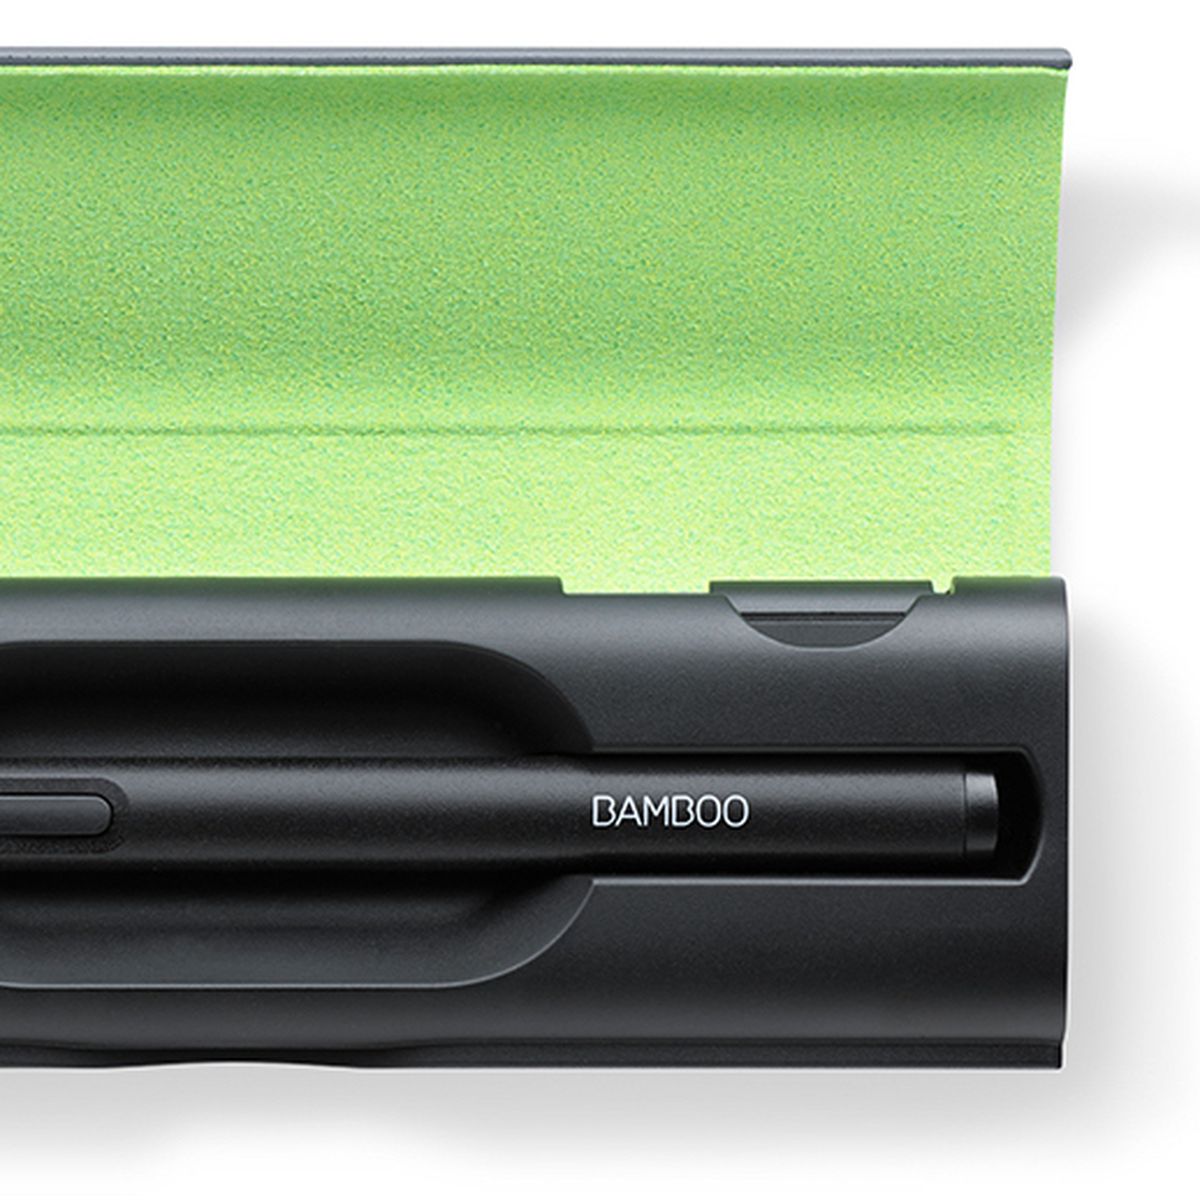 Wacom Announces $80 'Bamboo Sketch' Stylus for Drawing and Writing 